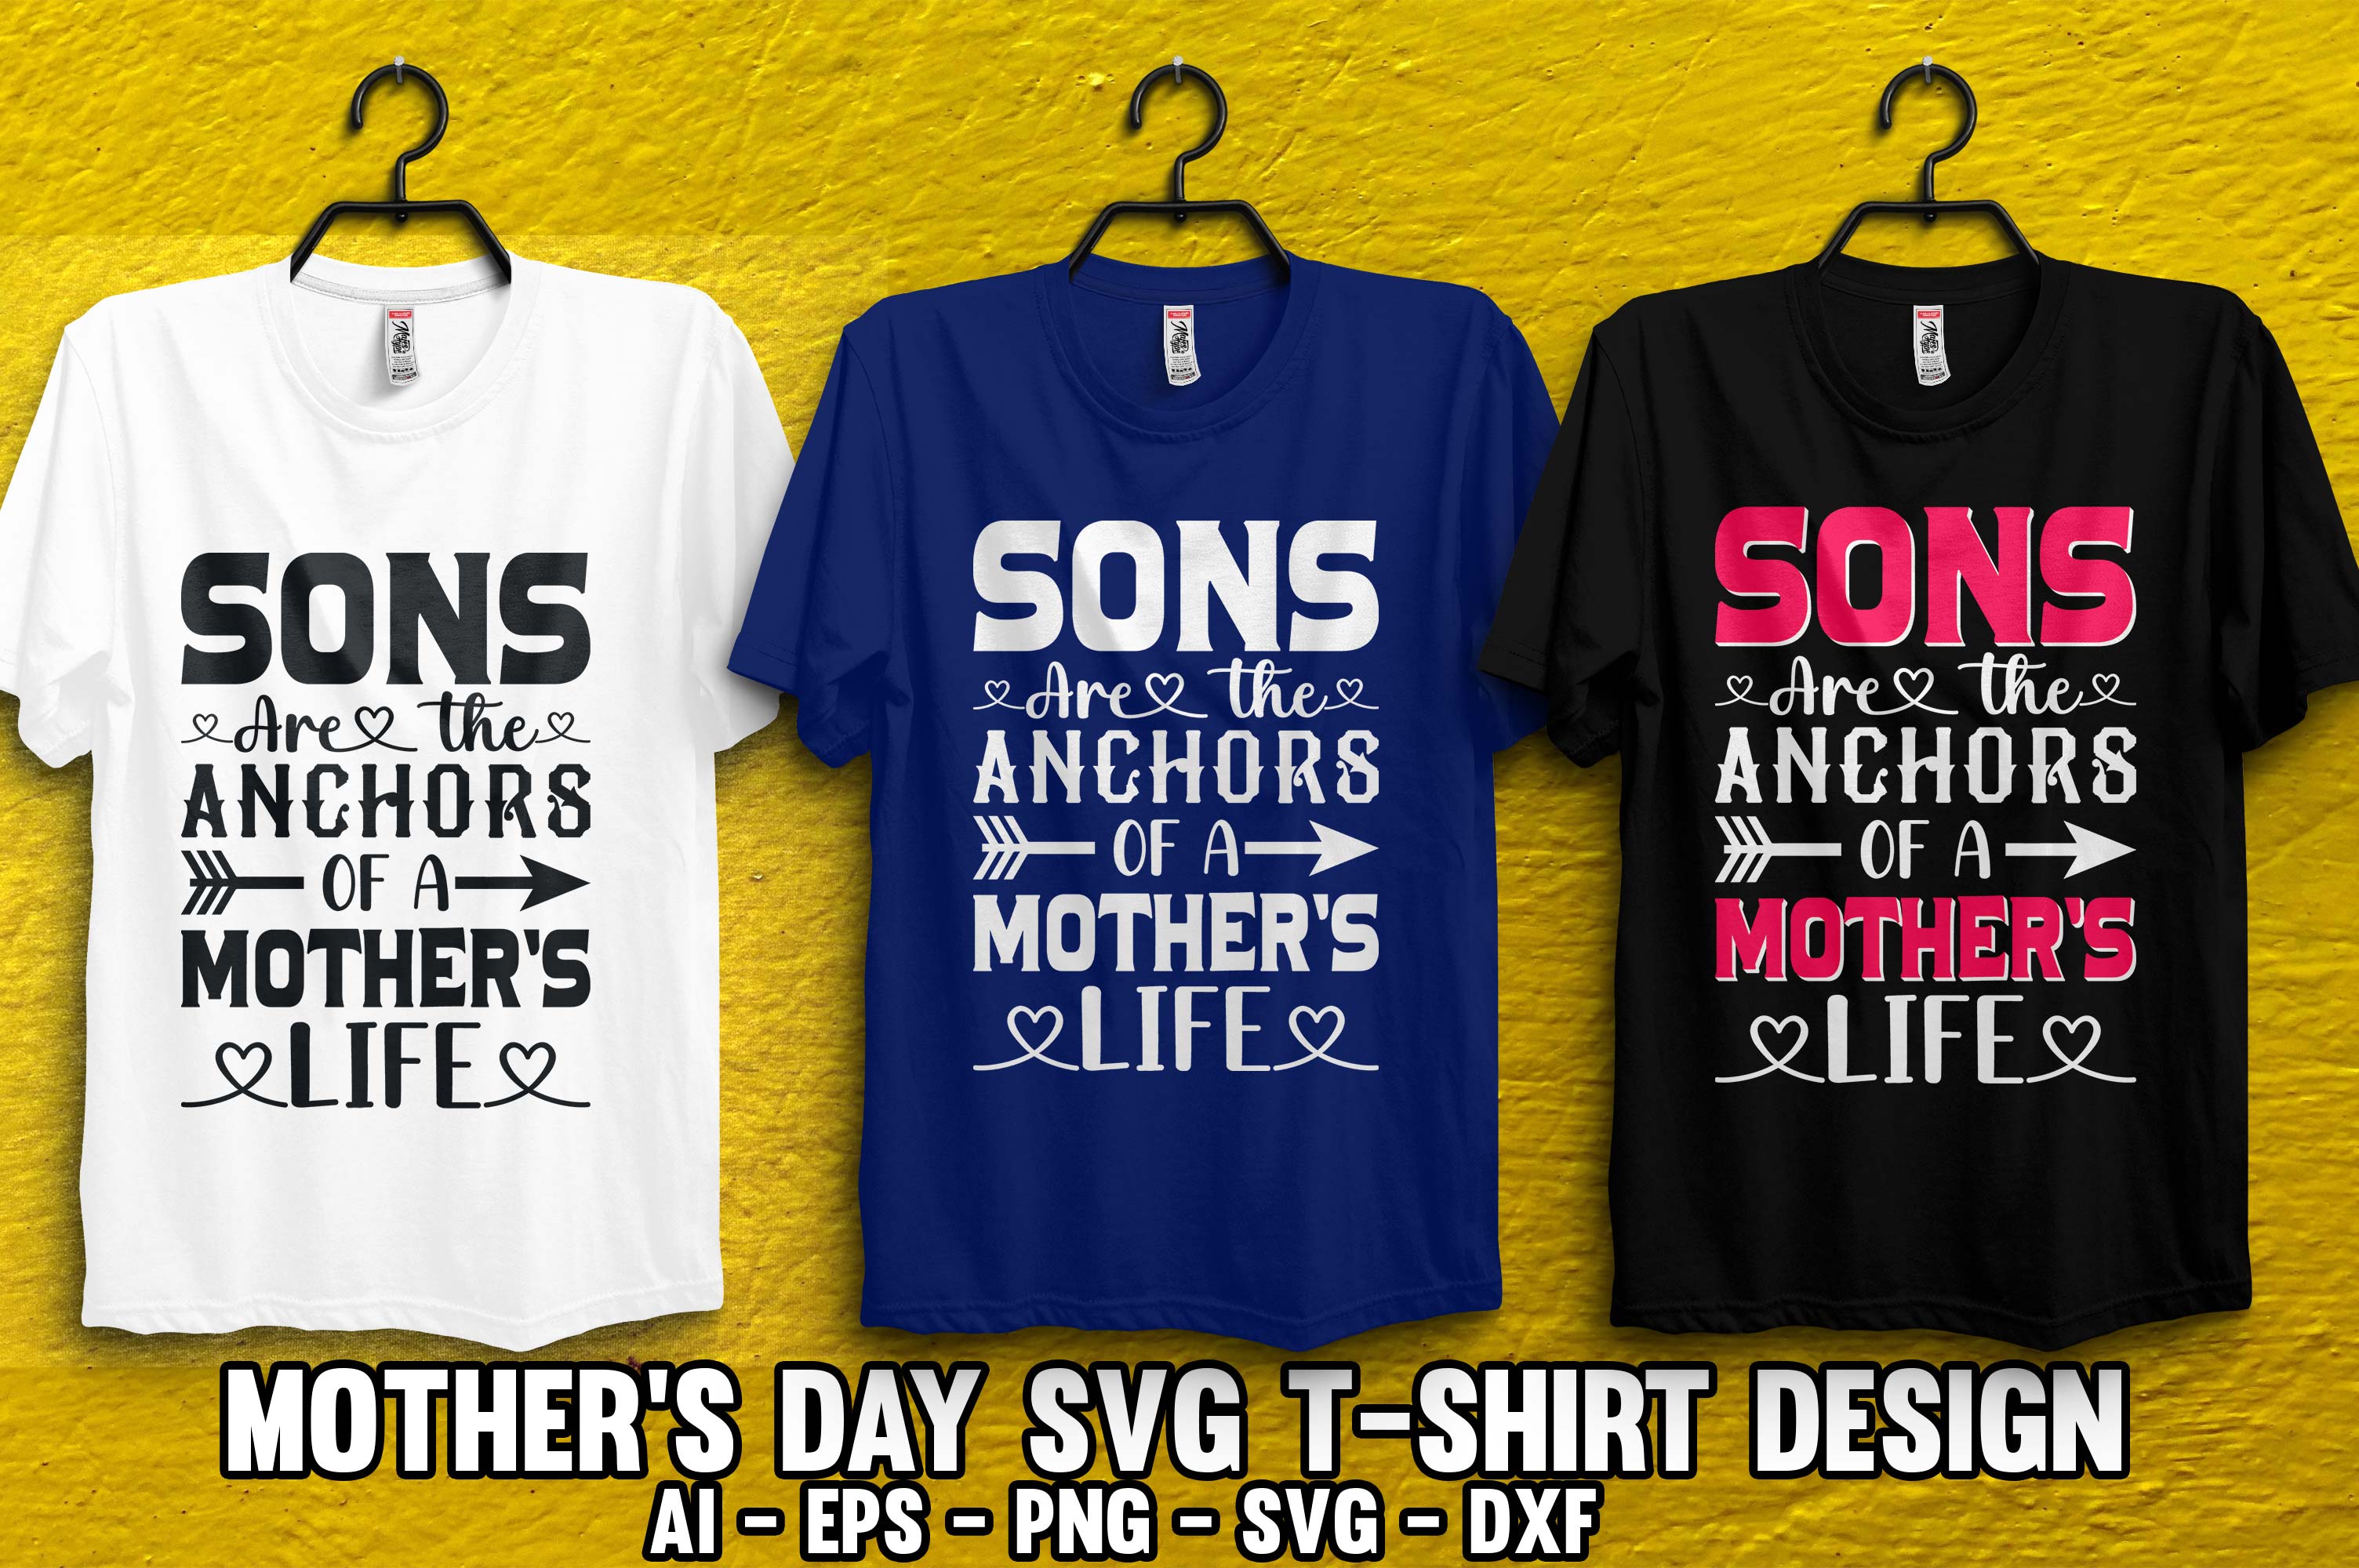 Three t - shirts that say sons are the anchors of a mother's life.